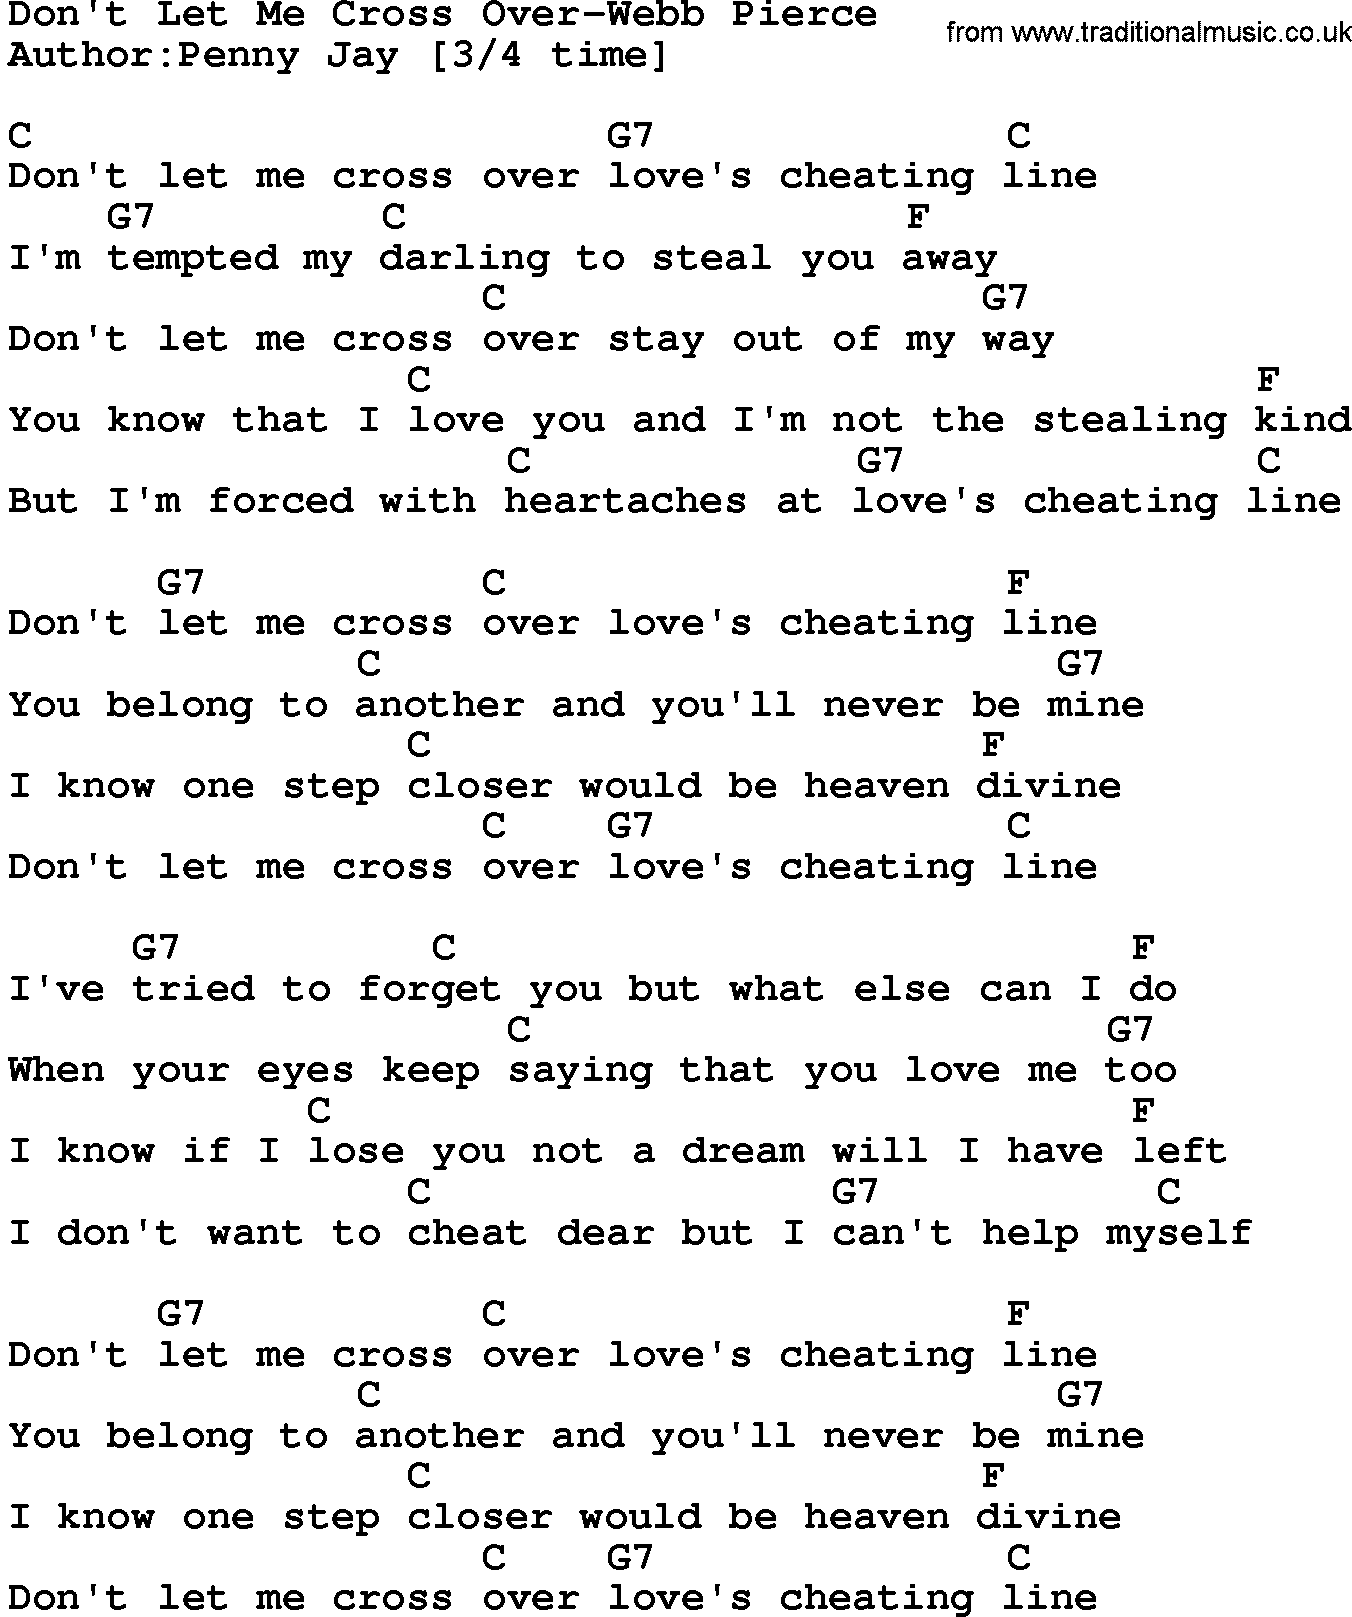 Country music song: Don't Let Me Cross Over-Webb Pierce lyrics and chords